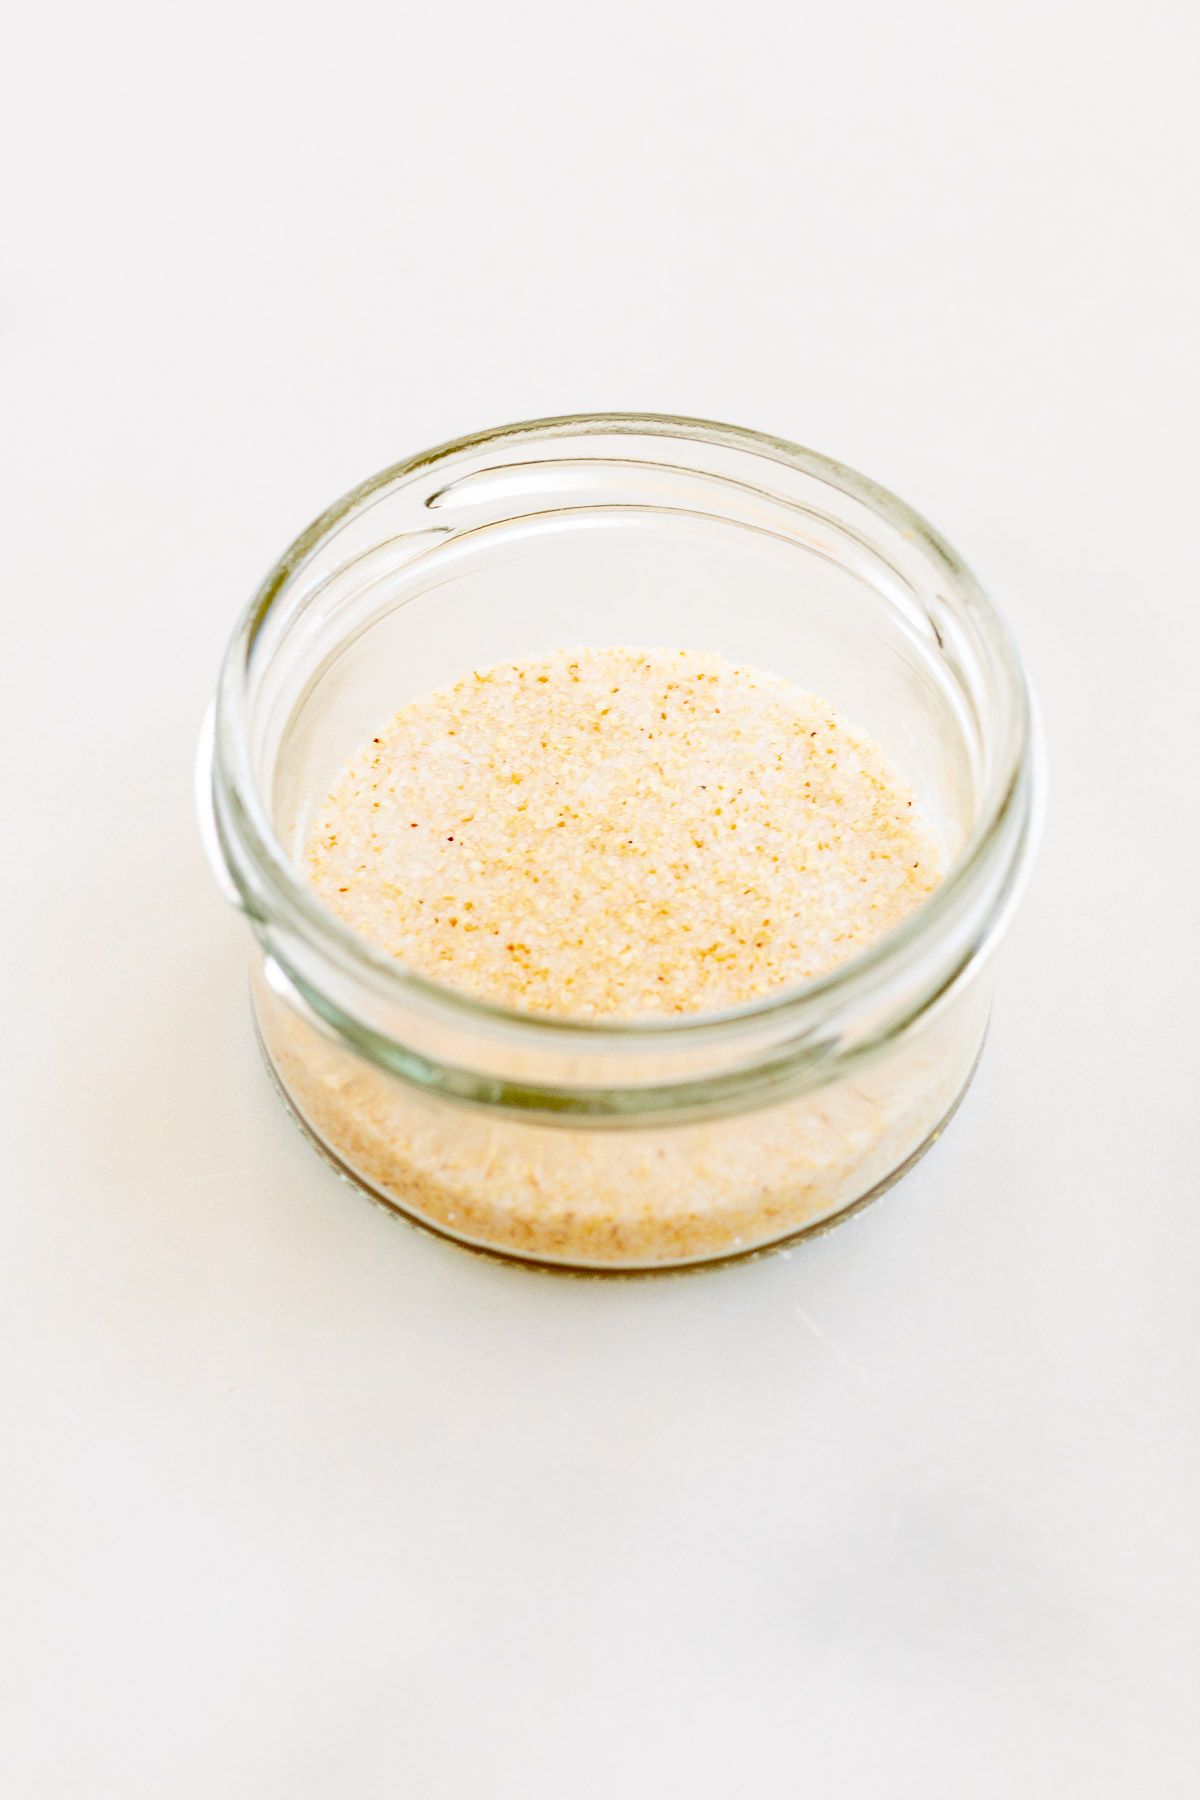 A small glass jar filled with homemade garlic salt, placed on a marble countertop.